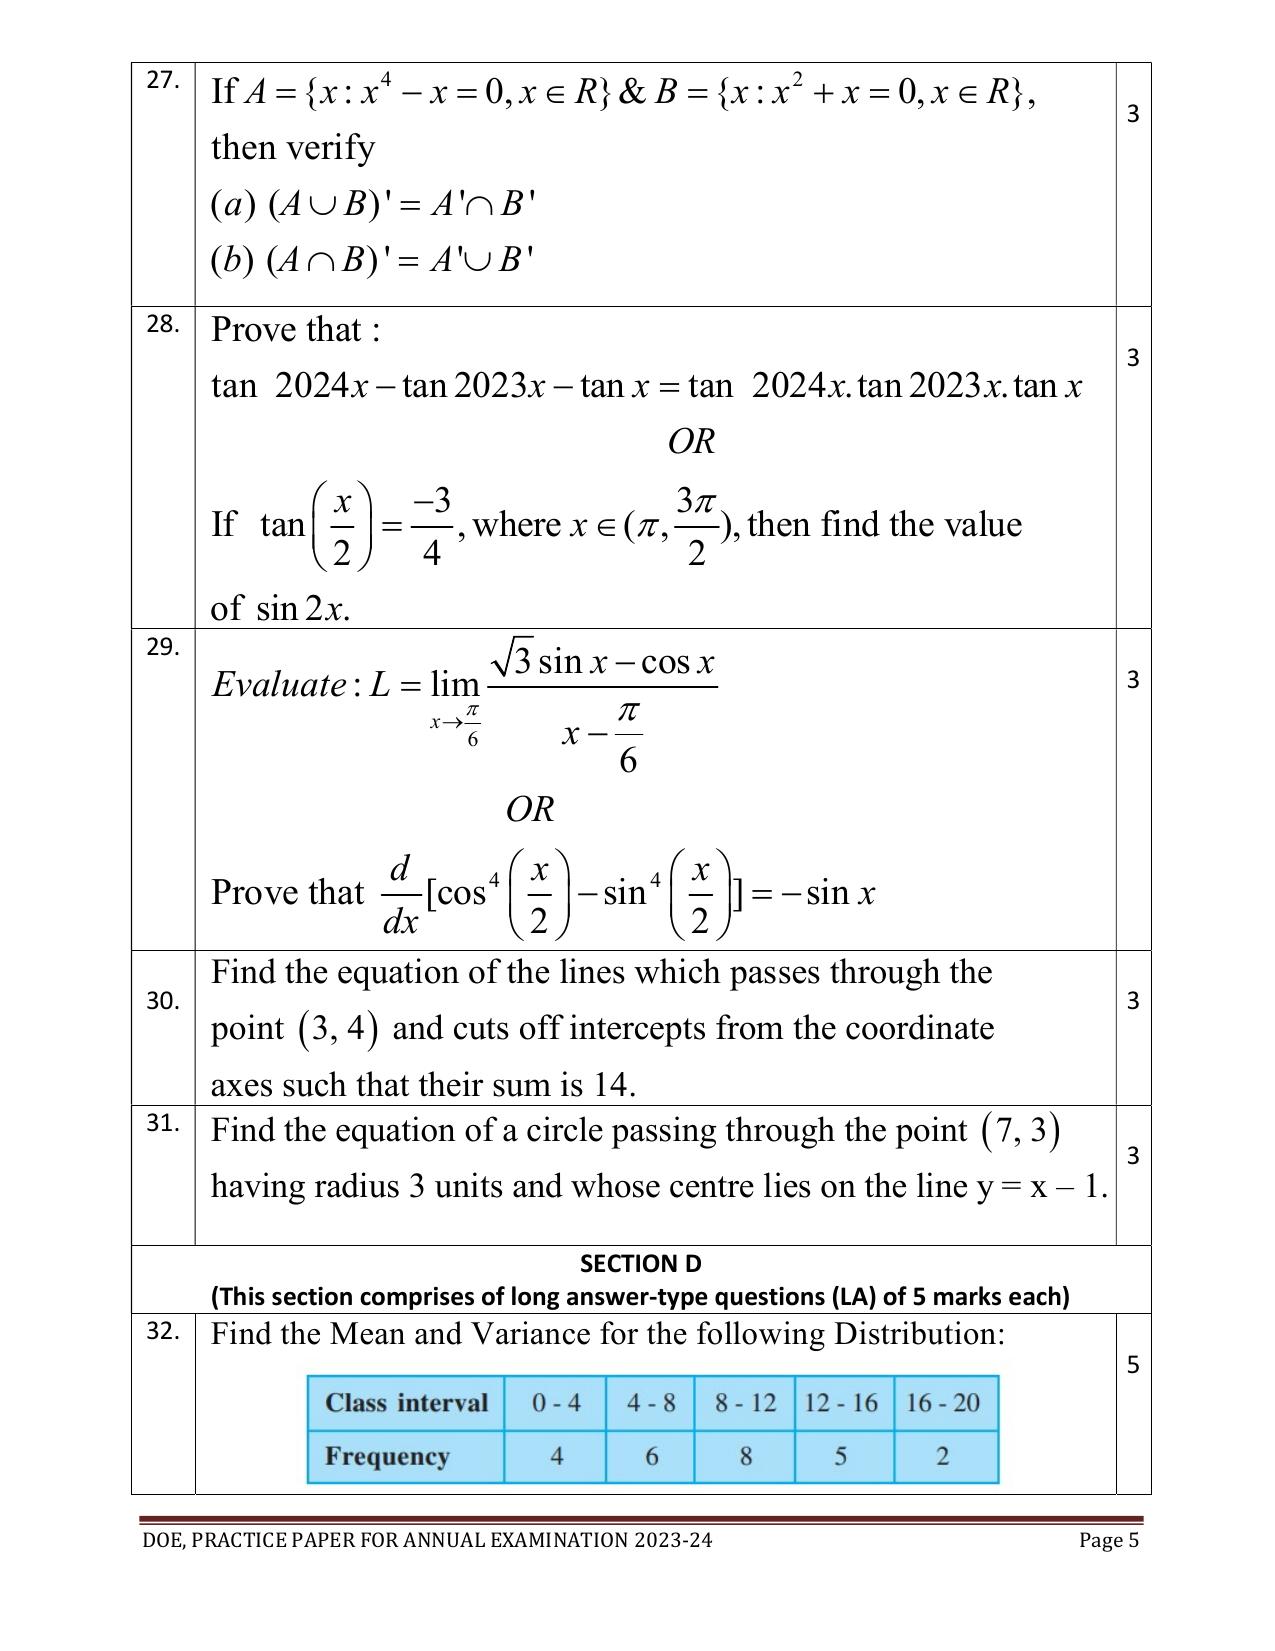 Edudel Class 11 Math (English) Practice Papers-2 (2023-24) - Page 5